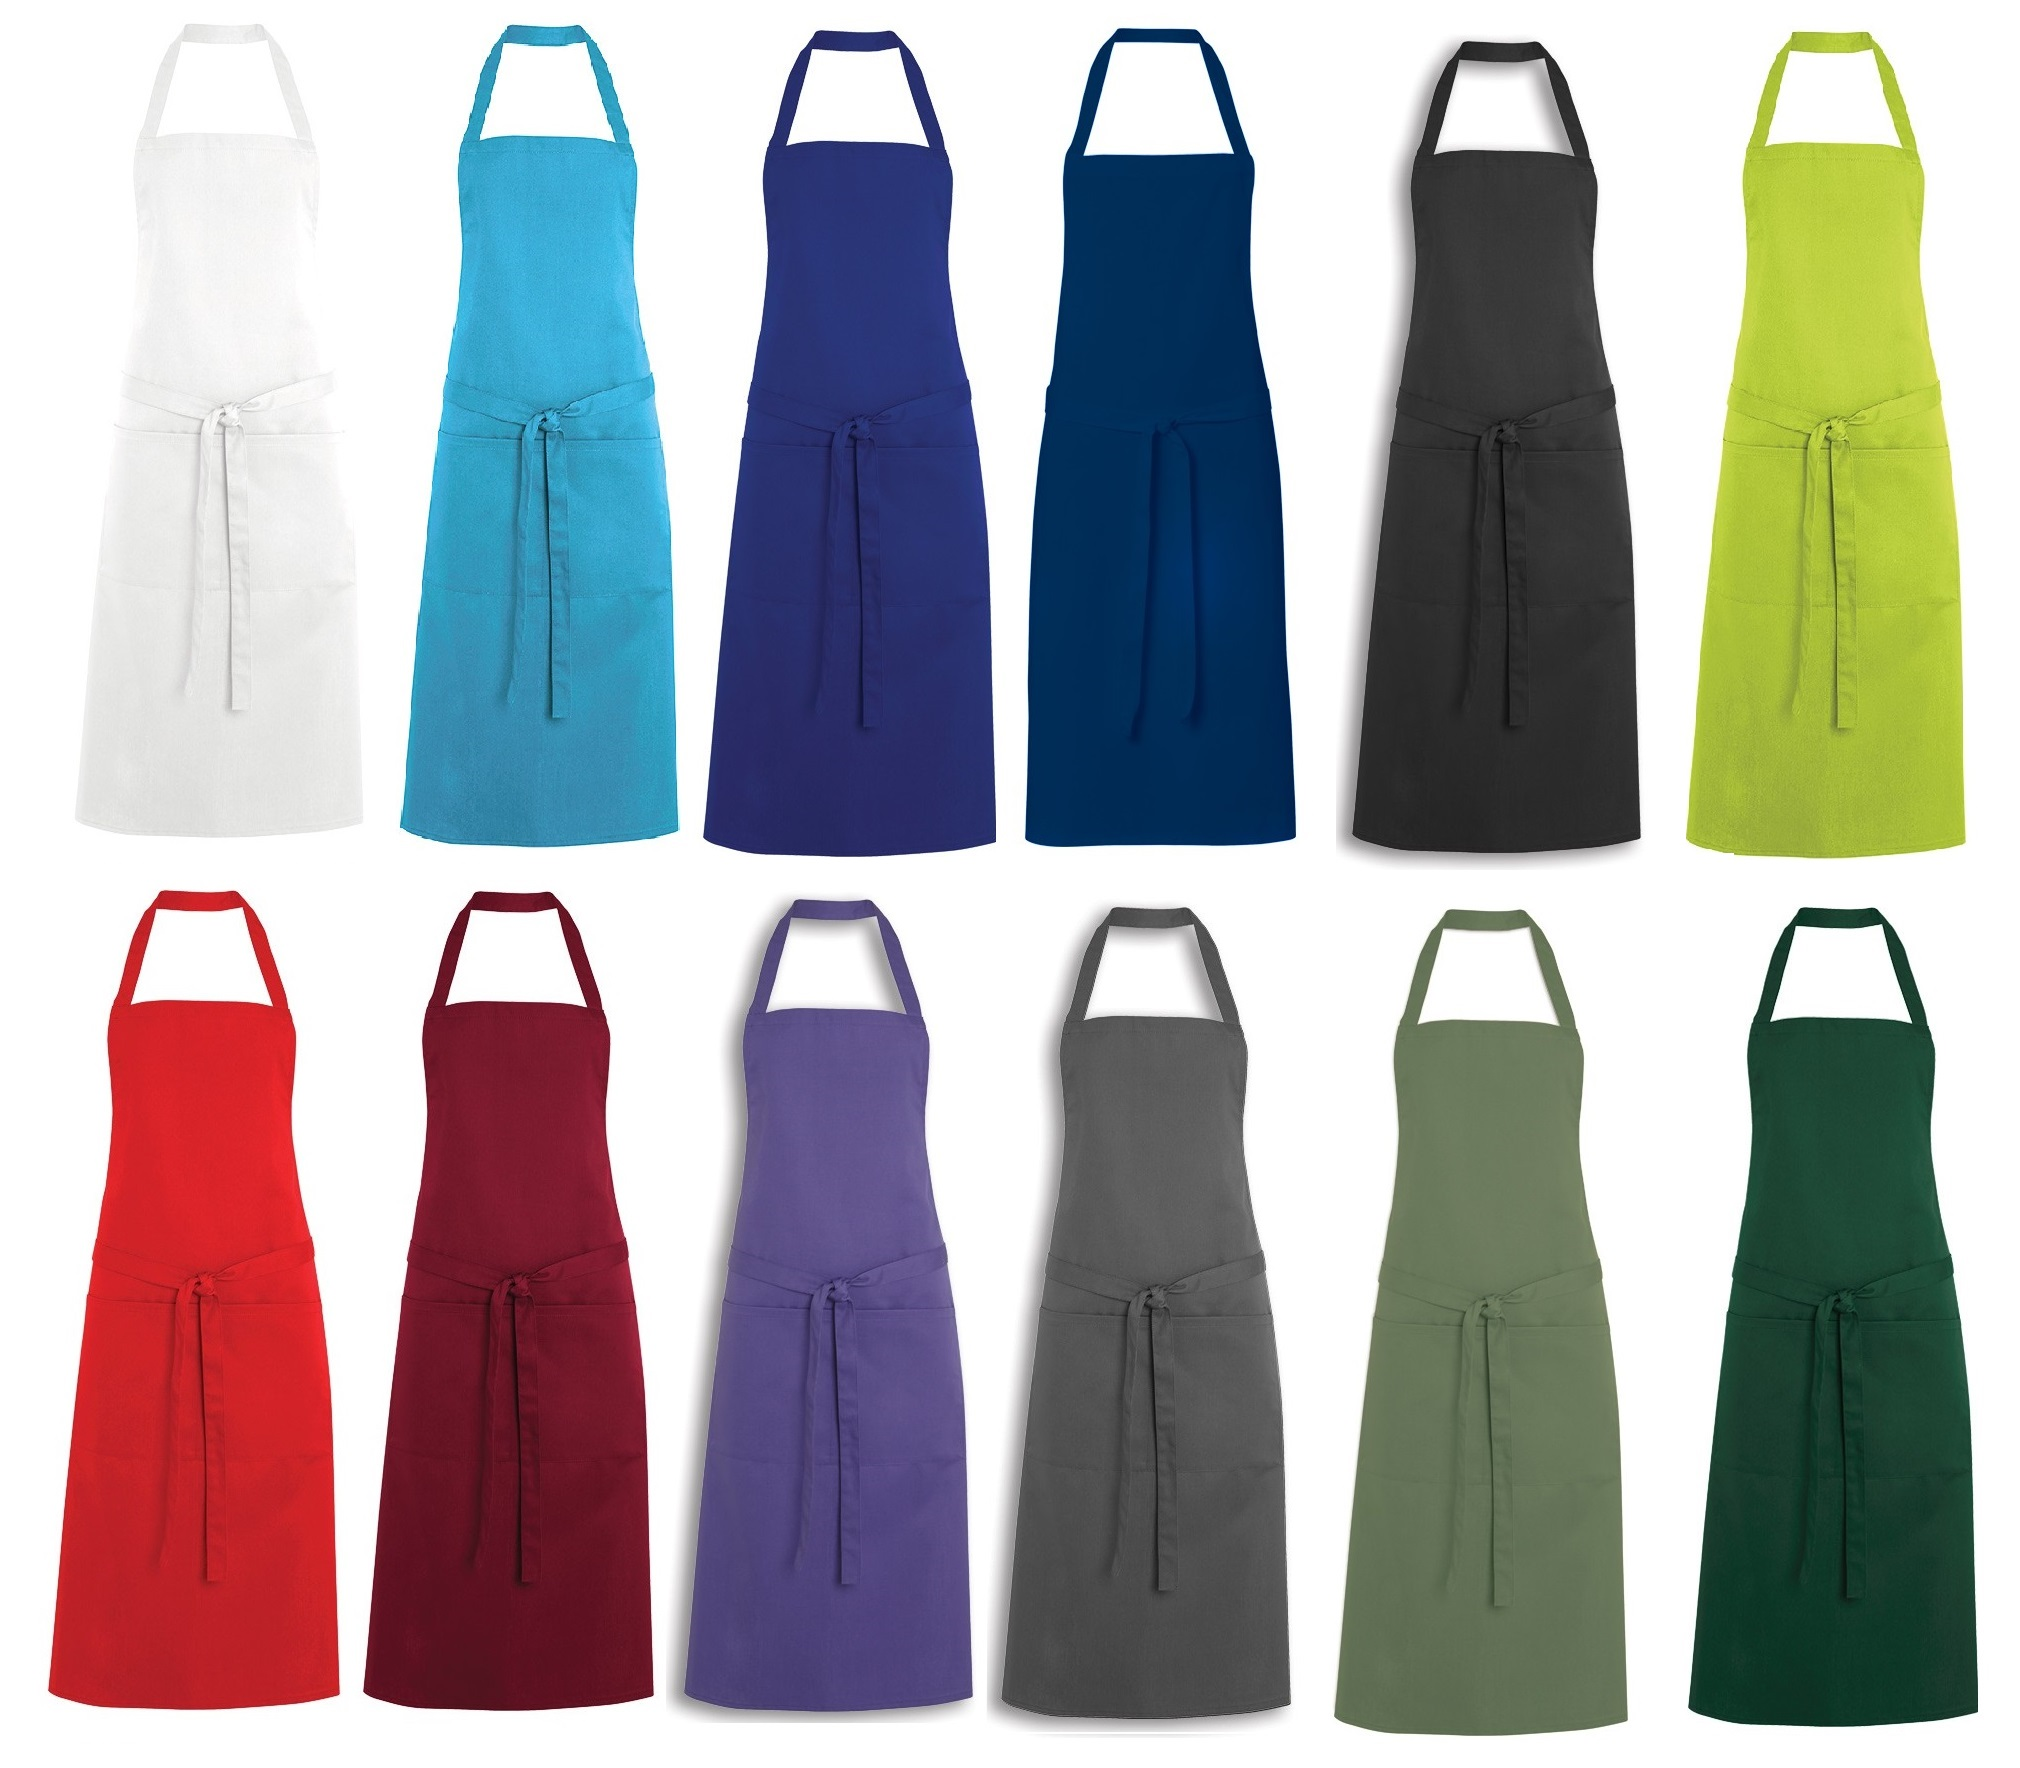 Warrior AP201 Polycotton Bib Apron with Pocket 85cm Length Catering Bar Cleaning 